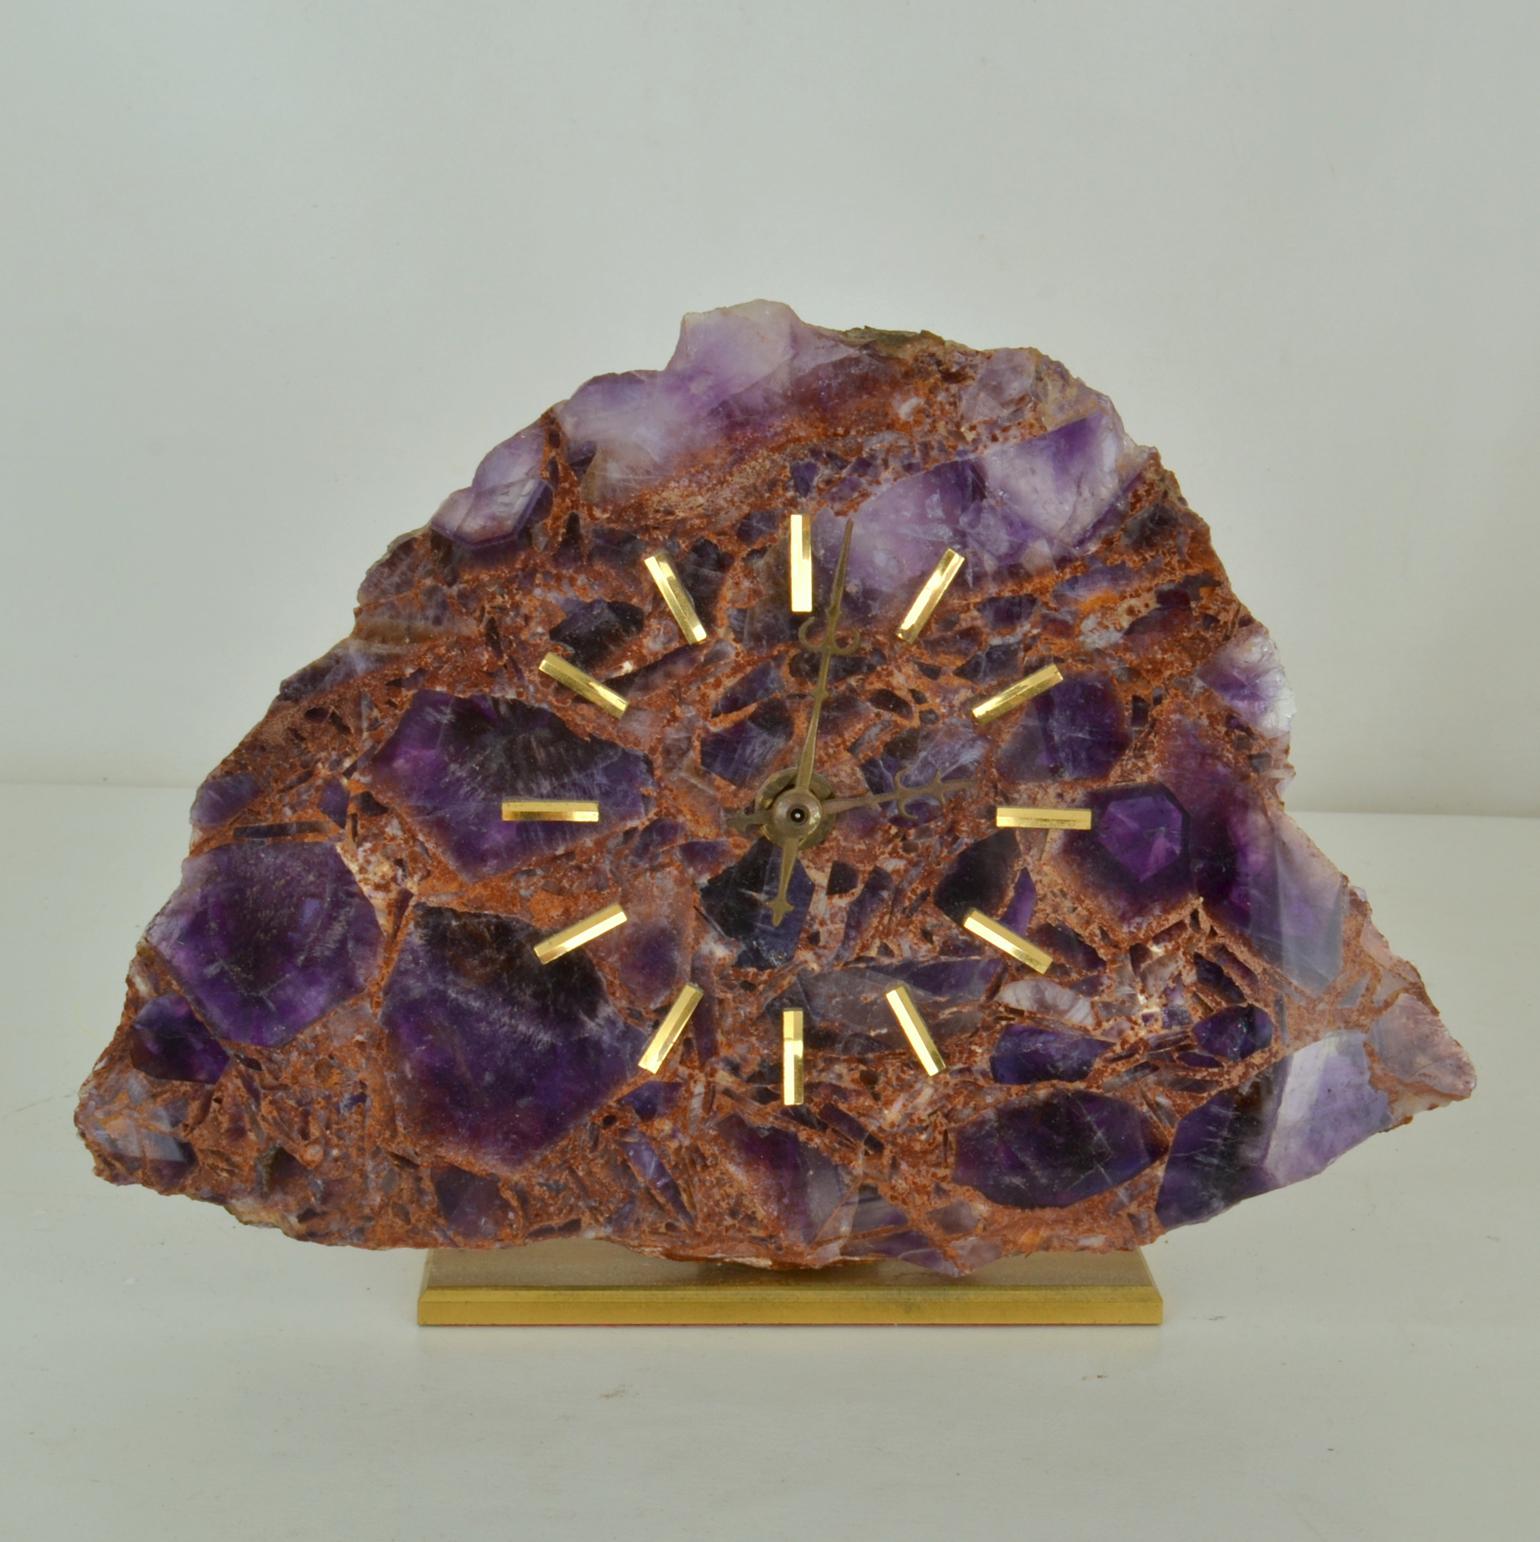 The Mid-Century Modern table clock is made of semi precious polished sliced quartz stone with amethyst insertions. The face with 12 hour brass markings mounted on a brushed brass base runs perfectly with AA battery operated quartz movement.